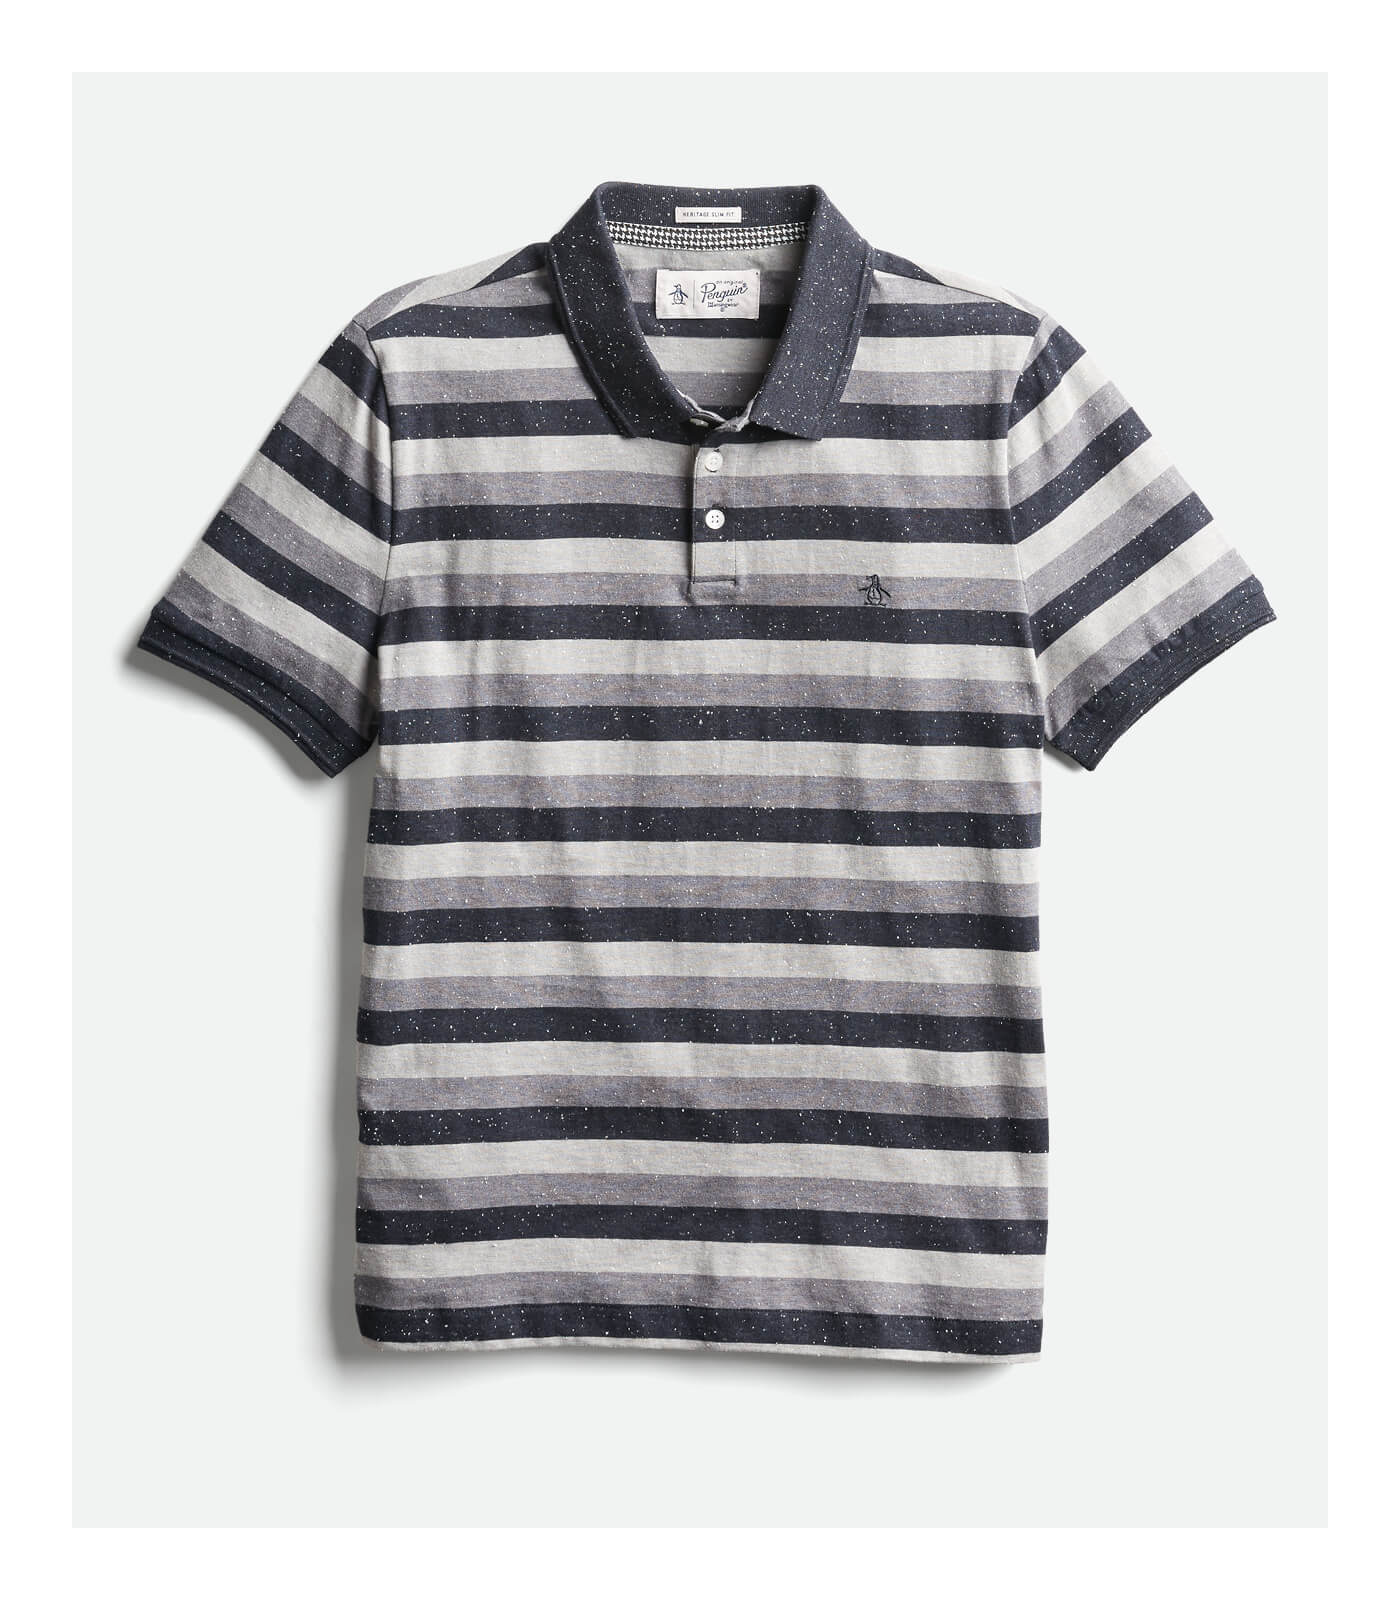 15 Items Every Guy Needs in 2018 | Stitch Fix Men